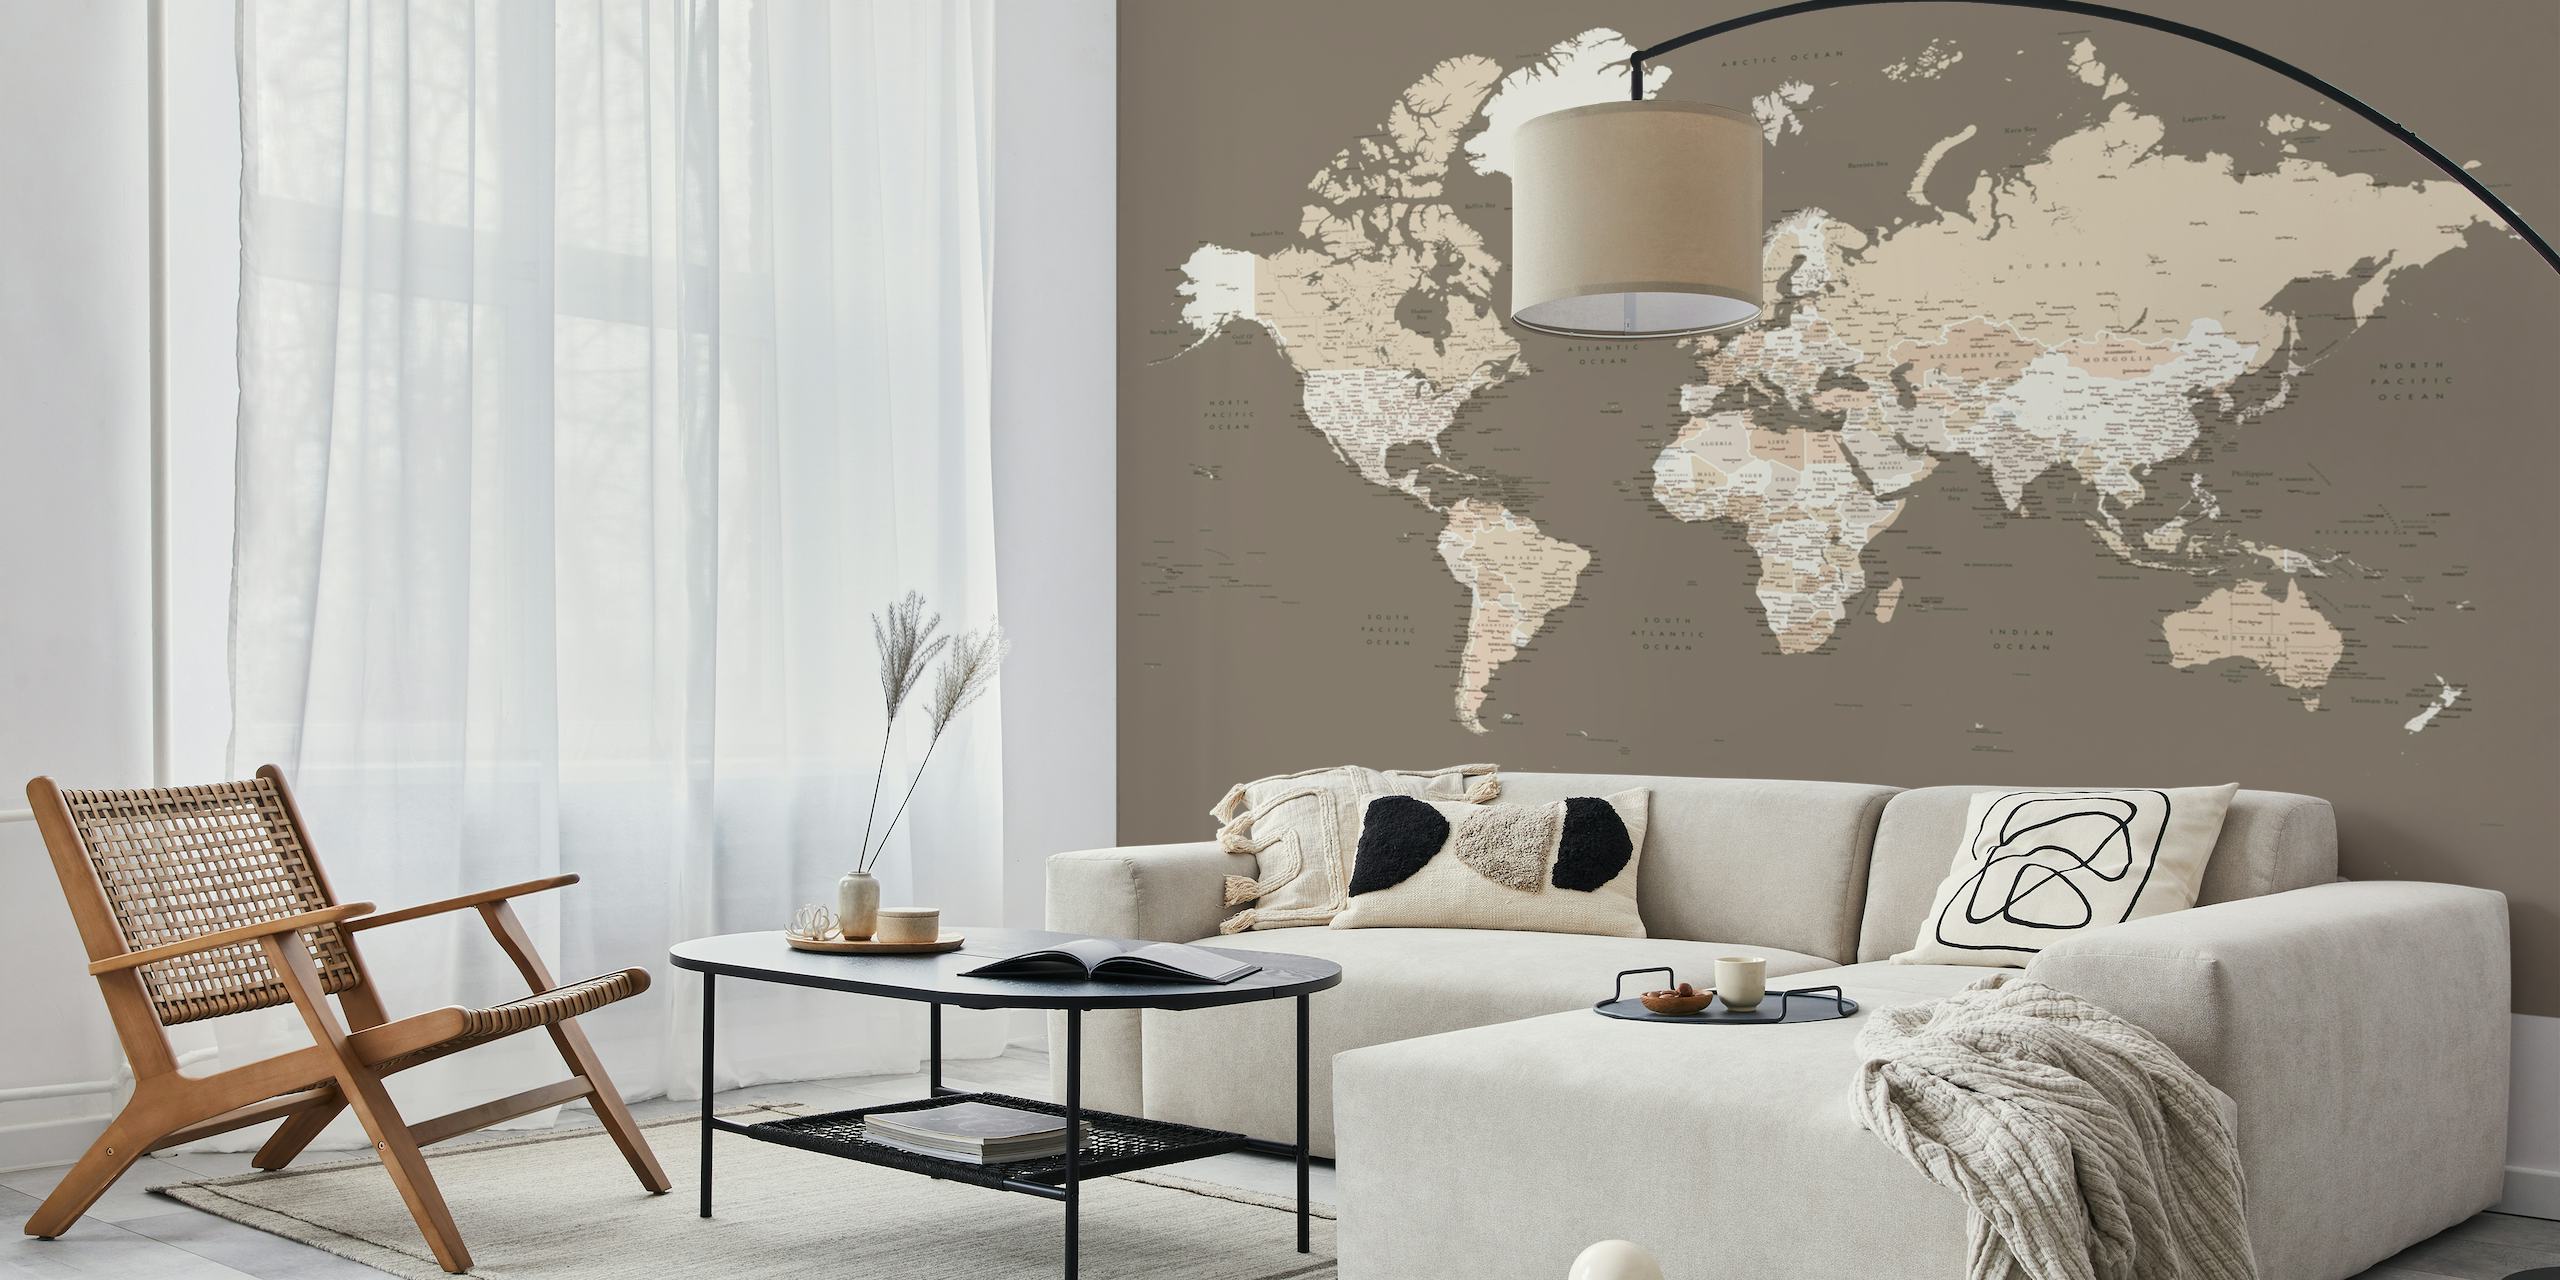 Antique-style world map wall mural in warm earth tones with a focus on Antarctica